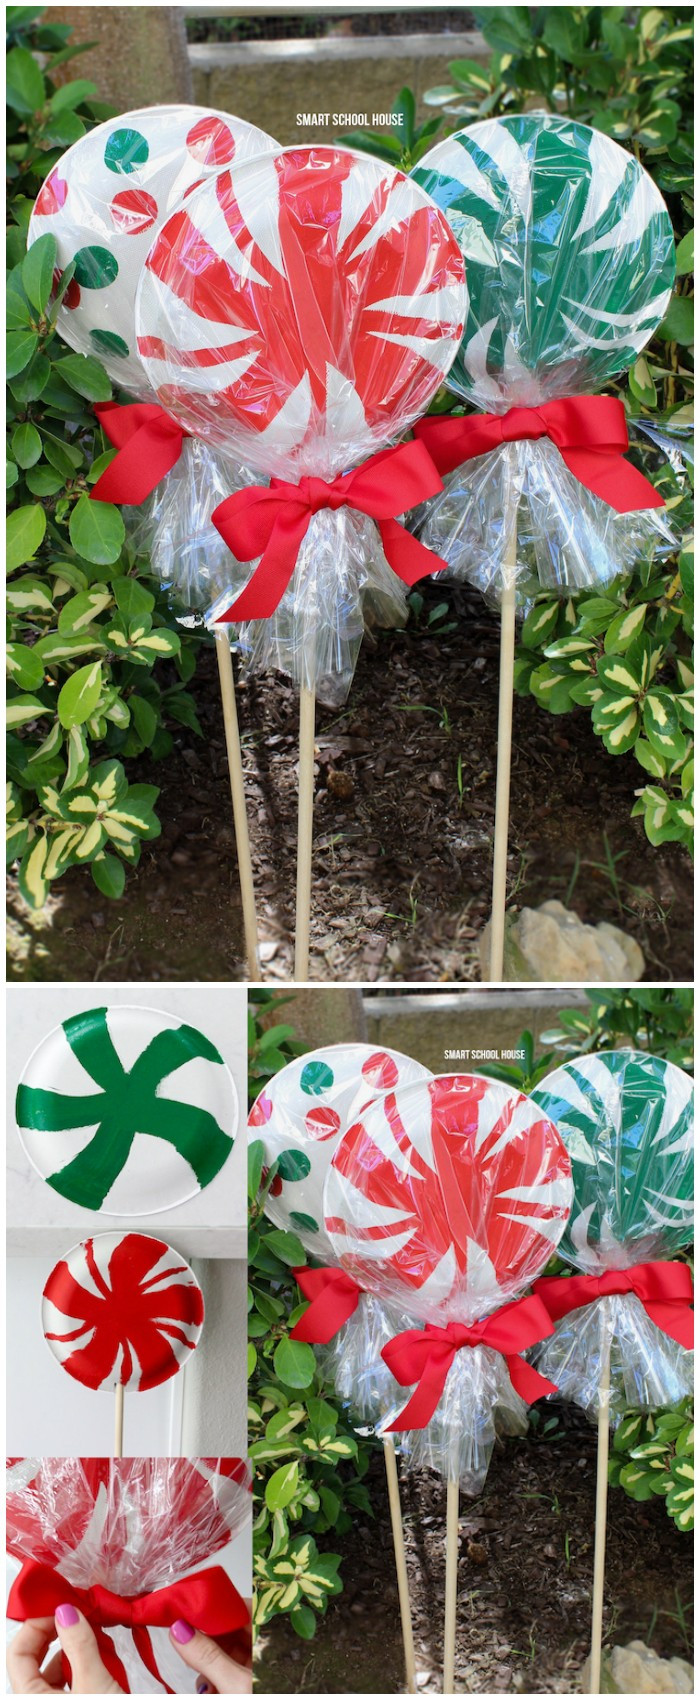 Discount Outdoor Christmas Decorations
 21 Cheap DIY Outdoor Christmas Decorations • DIY Home Decor